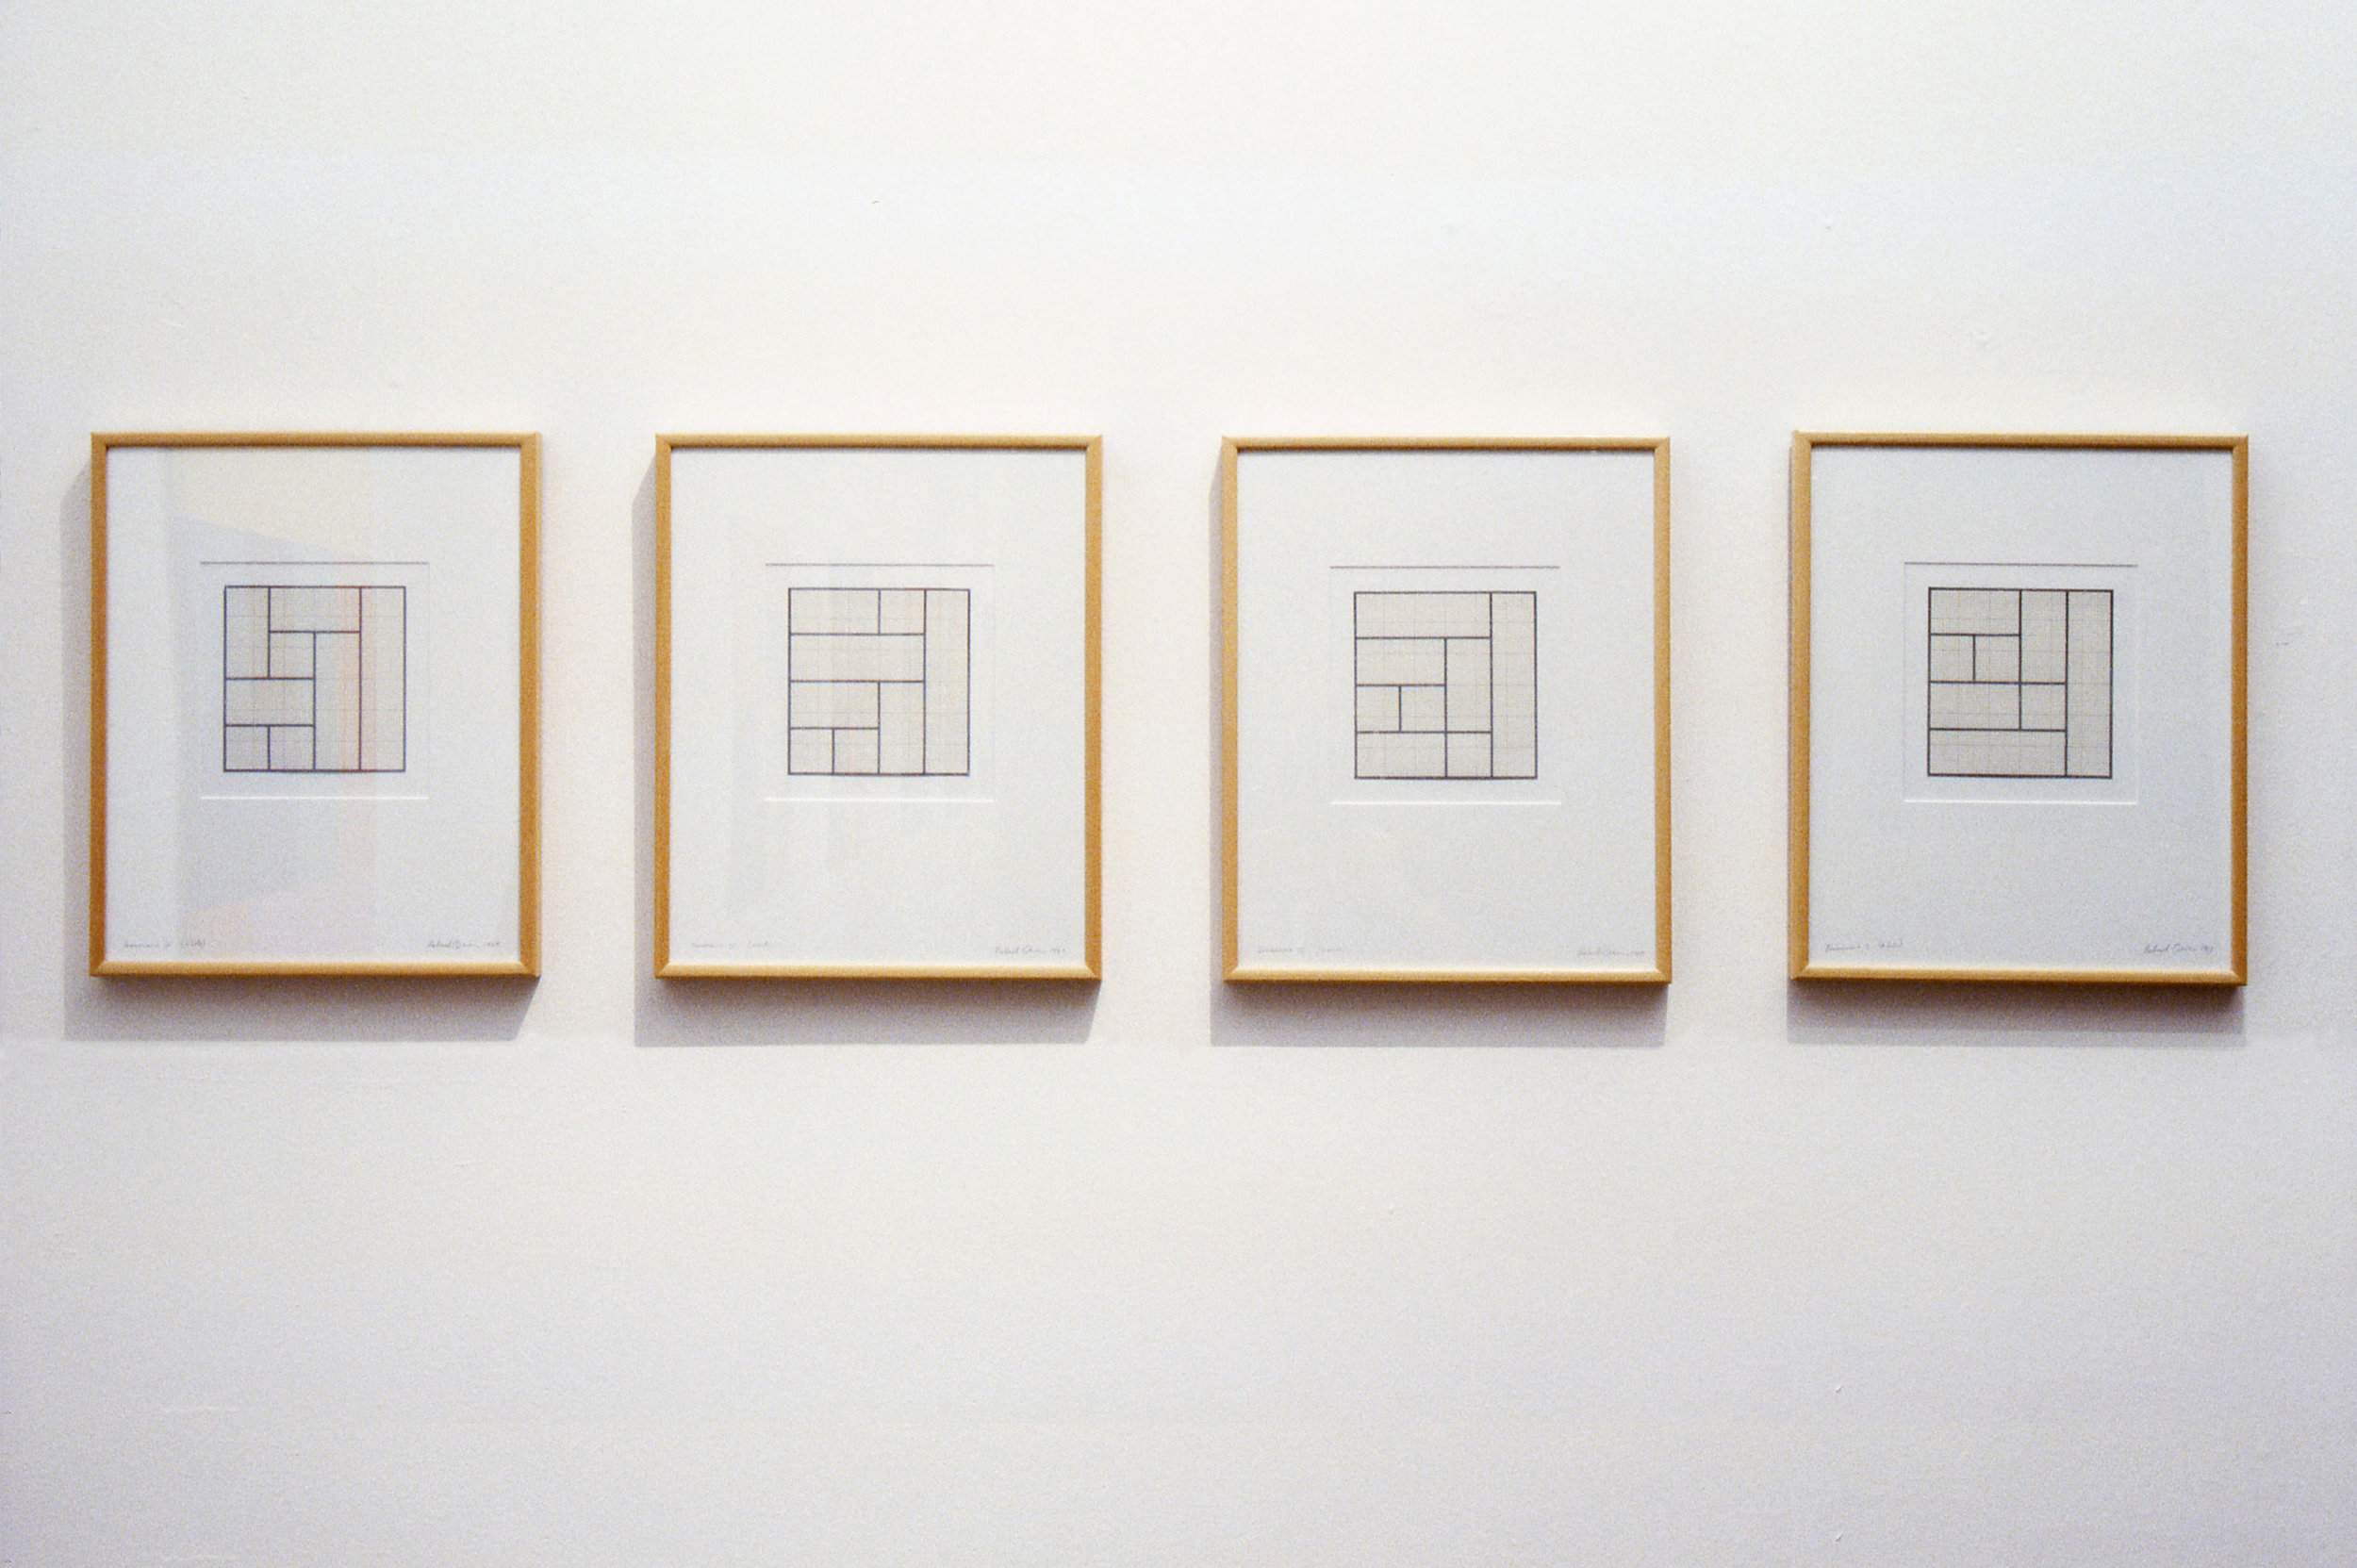   Terminus  series, 1969, Pencil and tape on Arches paper, 43 x 35cm each.&nbsp; 